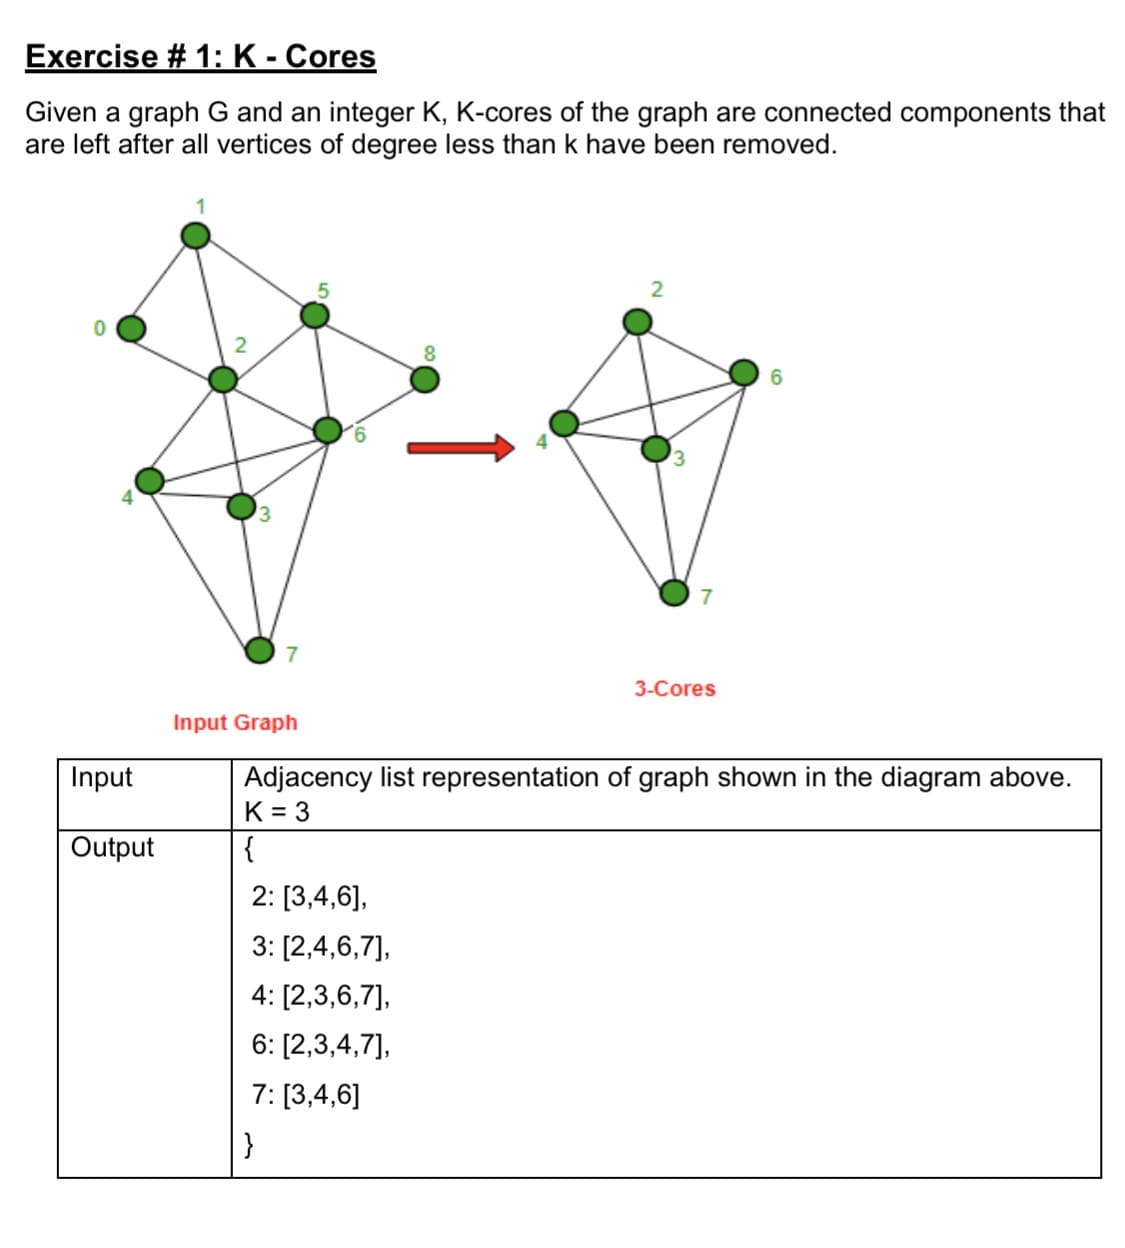 Exercise # 1: K - Cores
Given a graph G and an integer K, K-cores of the graph are connected components that
are left after all vertices of degree less than k have been removed.
7
7
3-Cores
Input Graph
Input
Adjacency list representation of graph shown in the diagram above.
K = 3
{
Output
2: [3,4,6],
3: [2,4,6,7],
4: [2,3,6,7],
6: [2,3,4,7],
7: [3,4,6]
}
